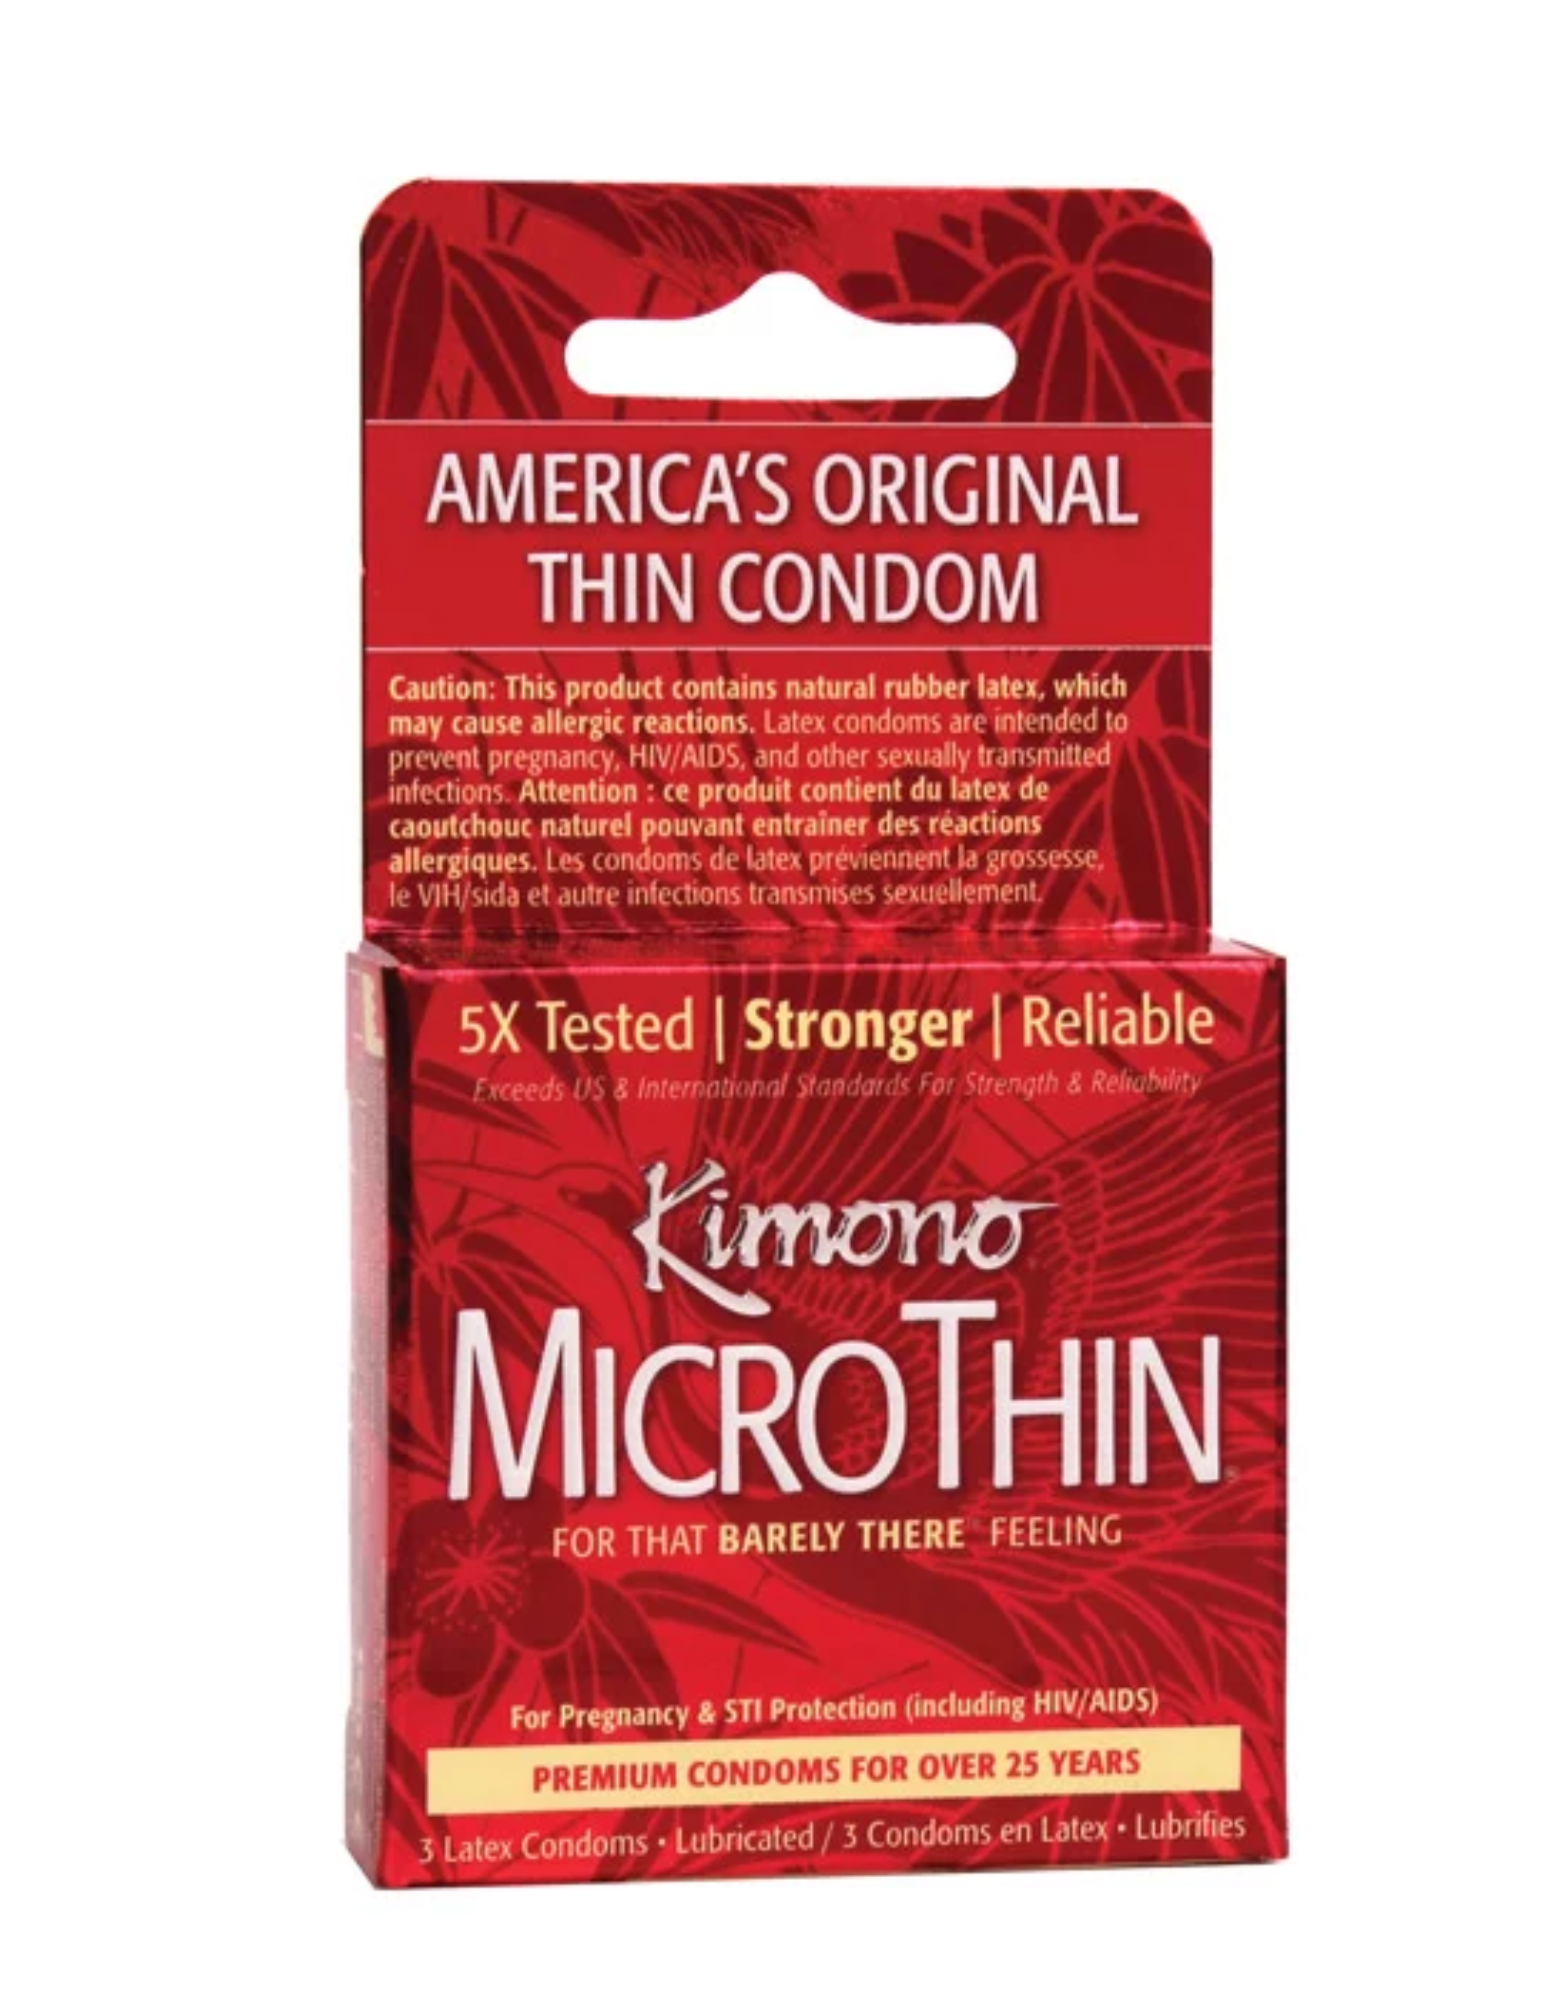 Photo of the Premium Lubricated Latex MicroThin Condoms from Kimono (red box).